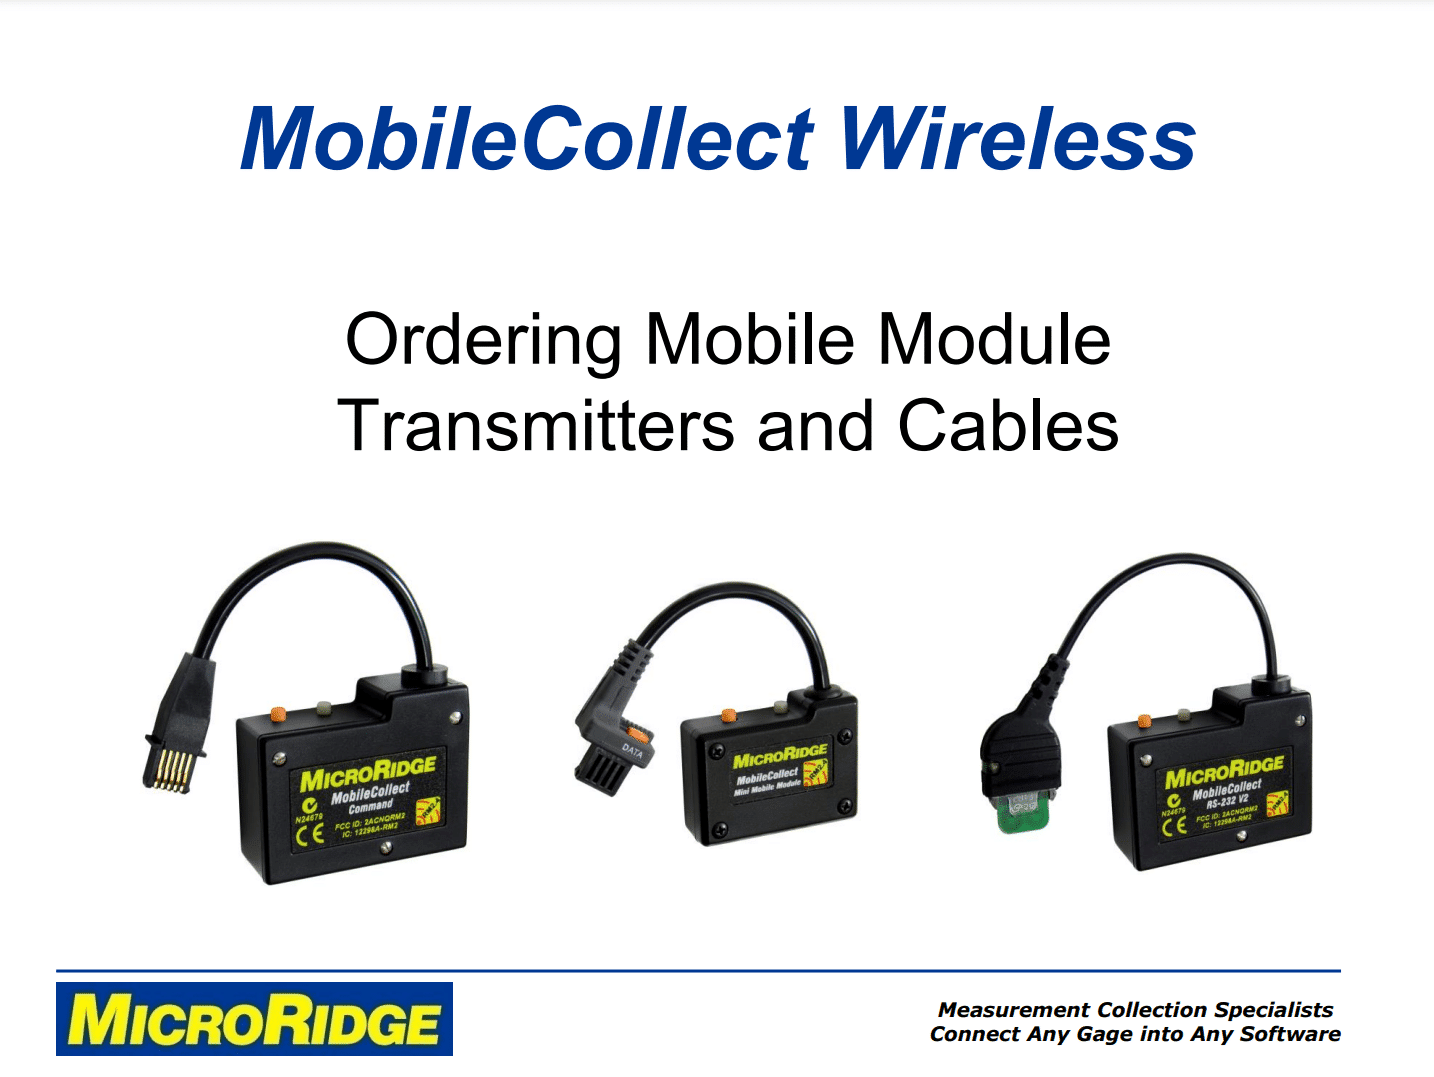 Ordering Mobile Module Transmitters and Cables